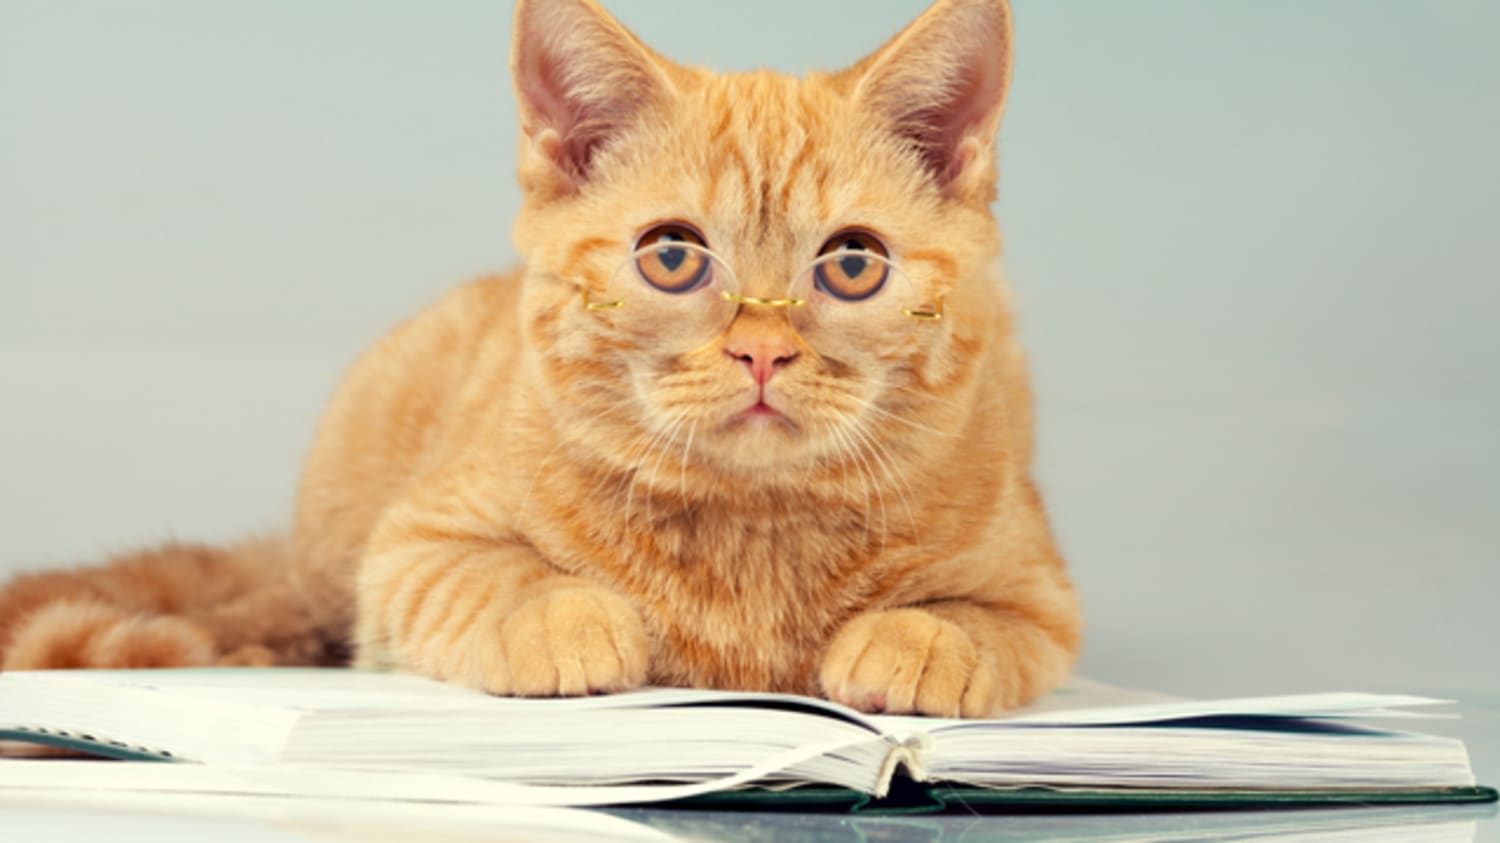 A 1975 Physics Paper Was Co-Authored by a Siamese Cat